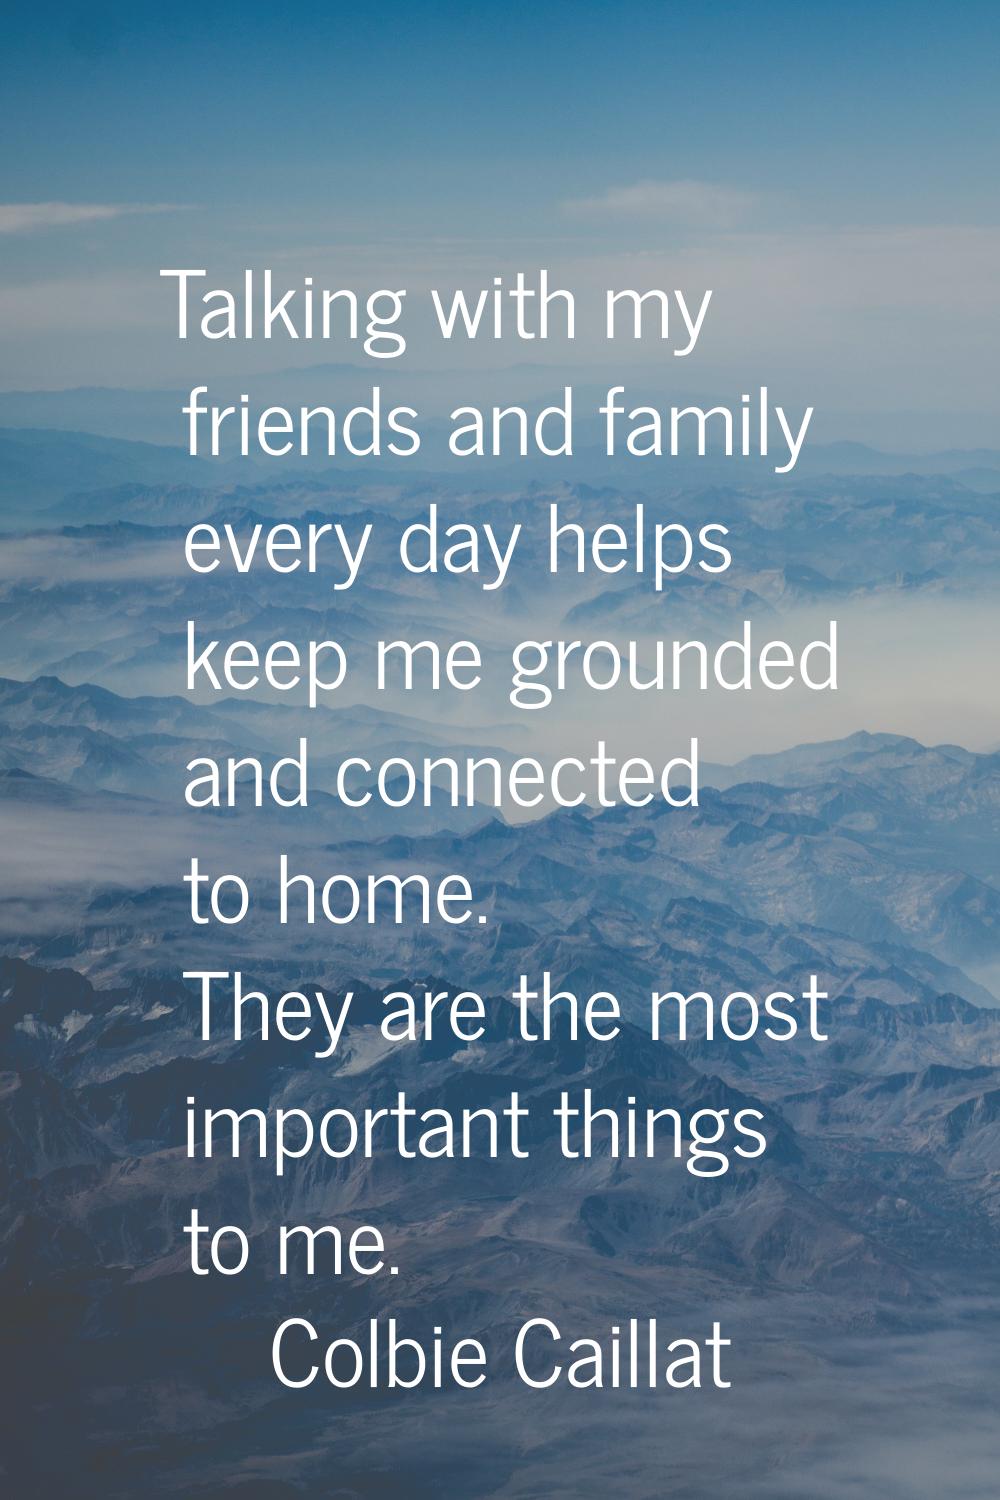 Talking with my friends and family every day helps keep me grounded and connected to home. They are